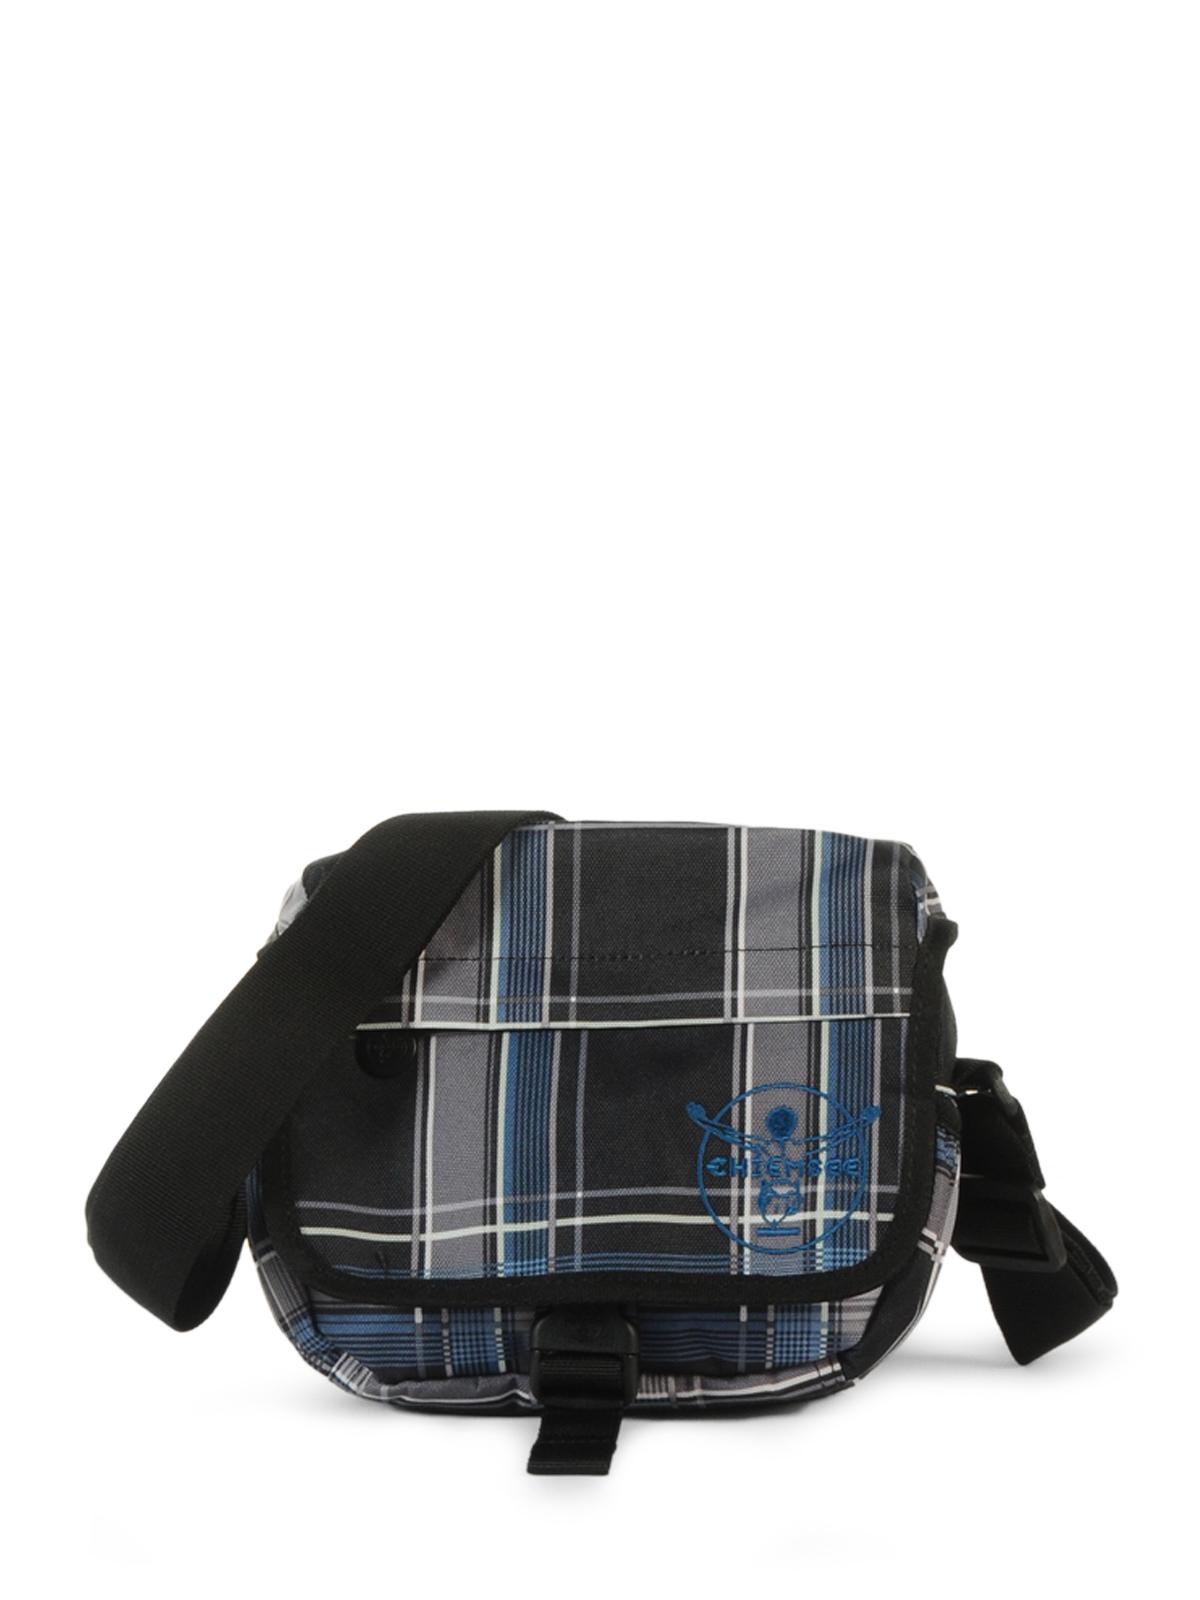 Foto Chiemsee Bolso negro/gris ONE SIZE foto 470713